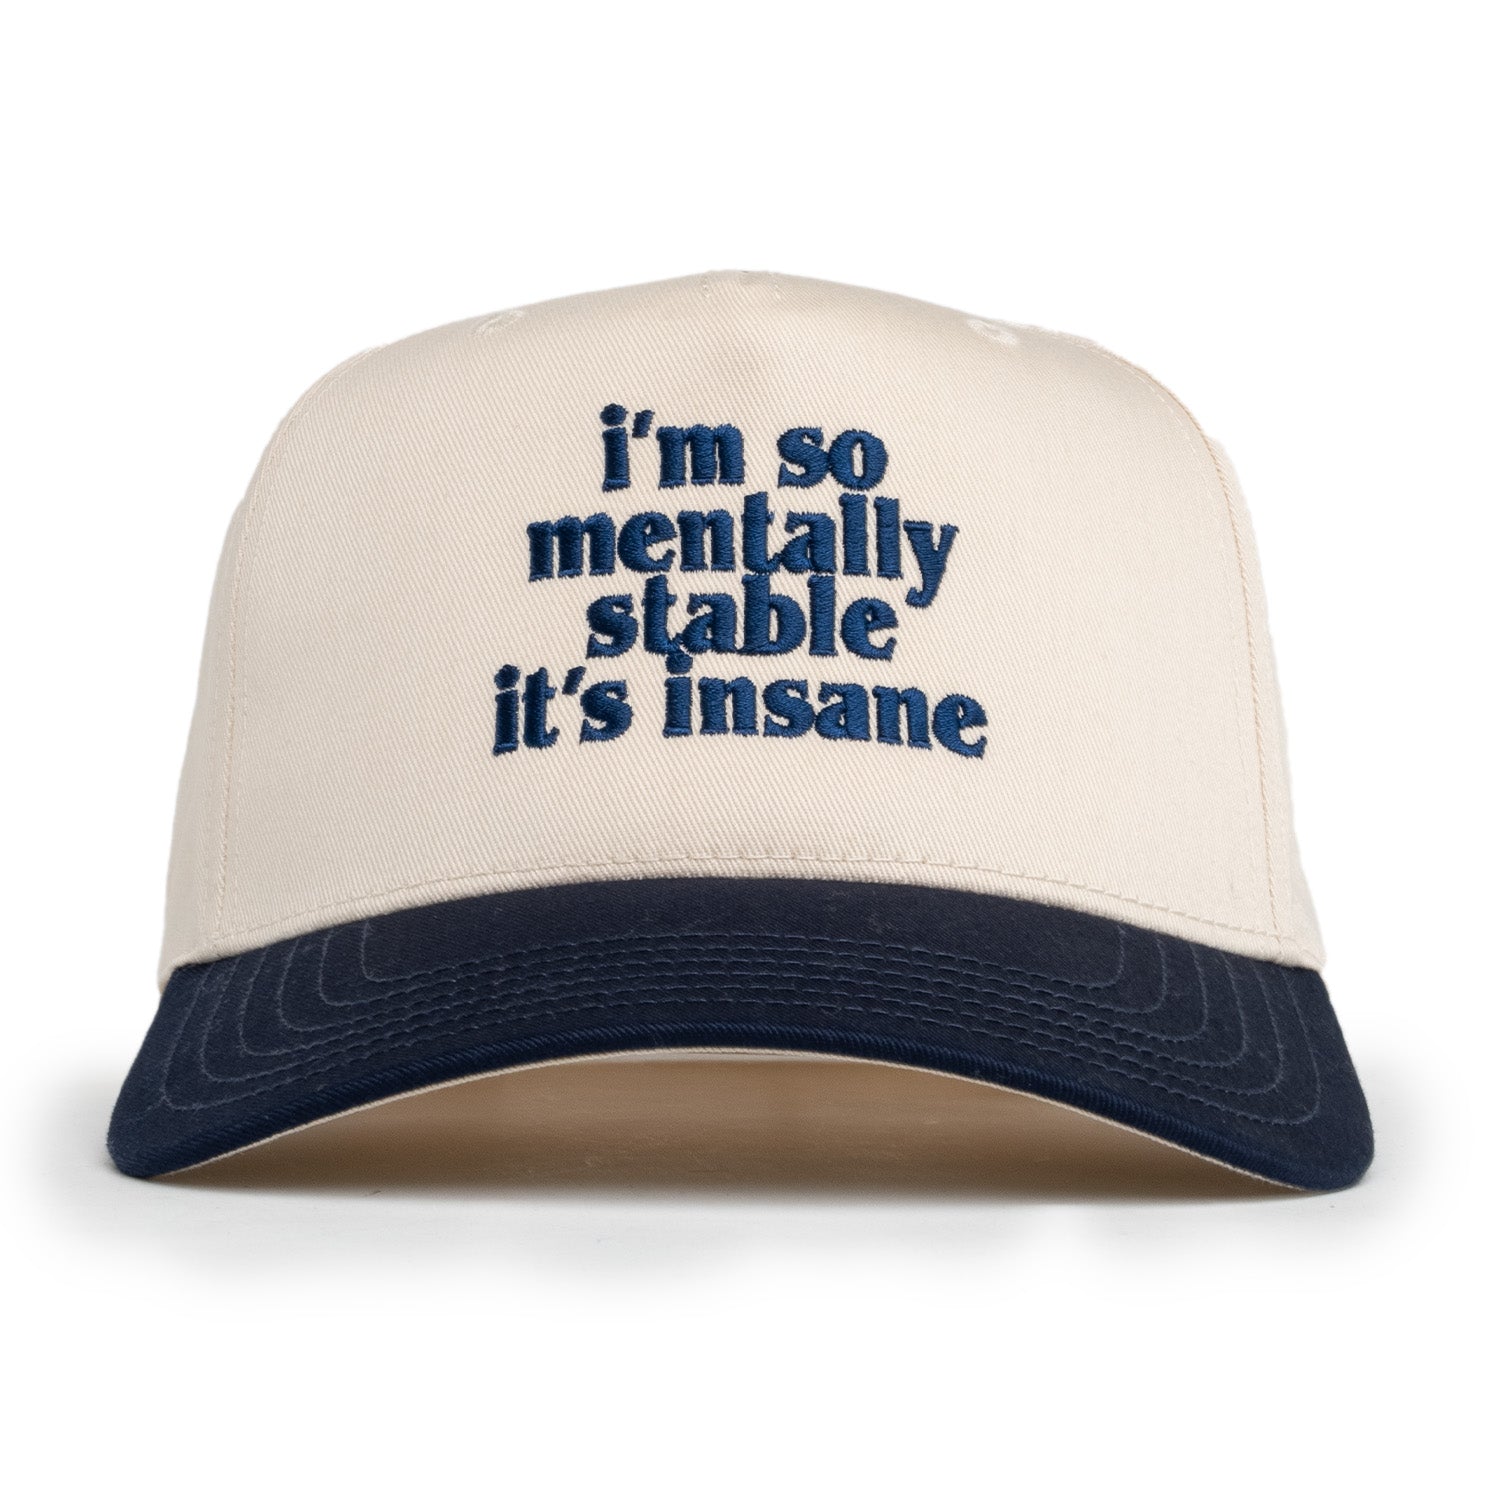 i'm so mentally stable it's insane hat